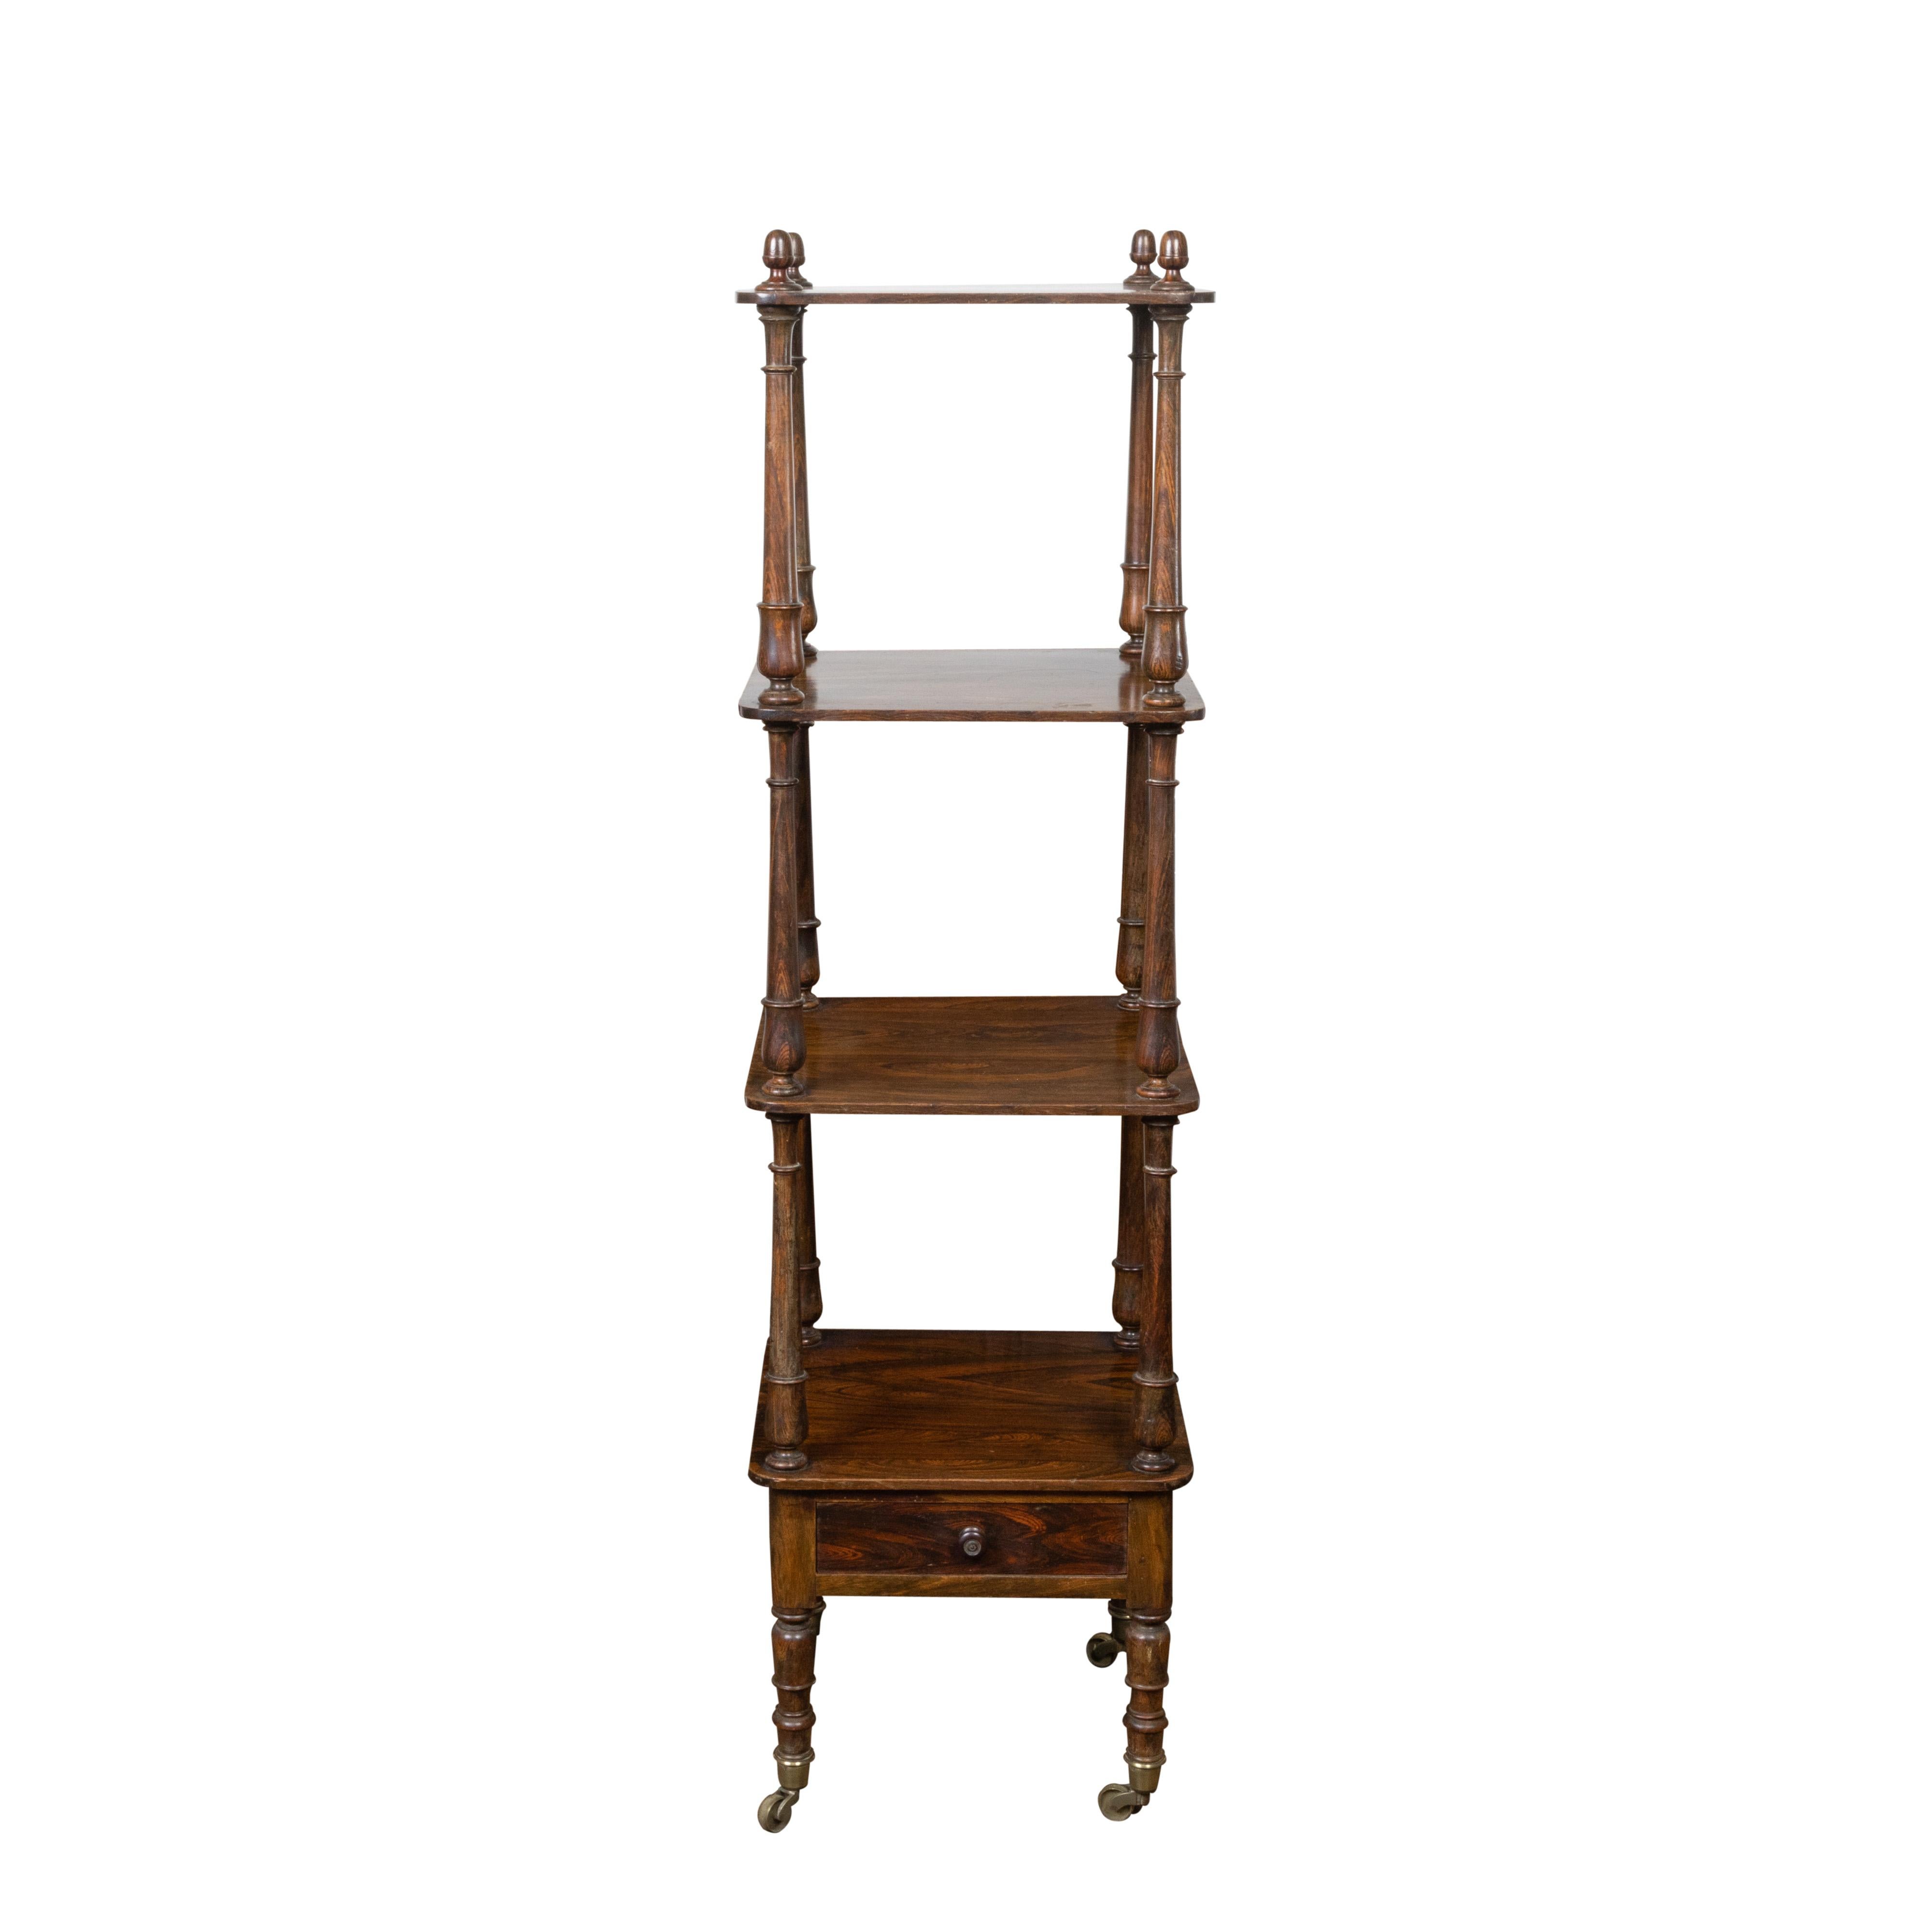 English 19th Century Wooden Trolley with Three Shelves and Single Drawer For Sale